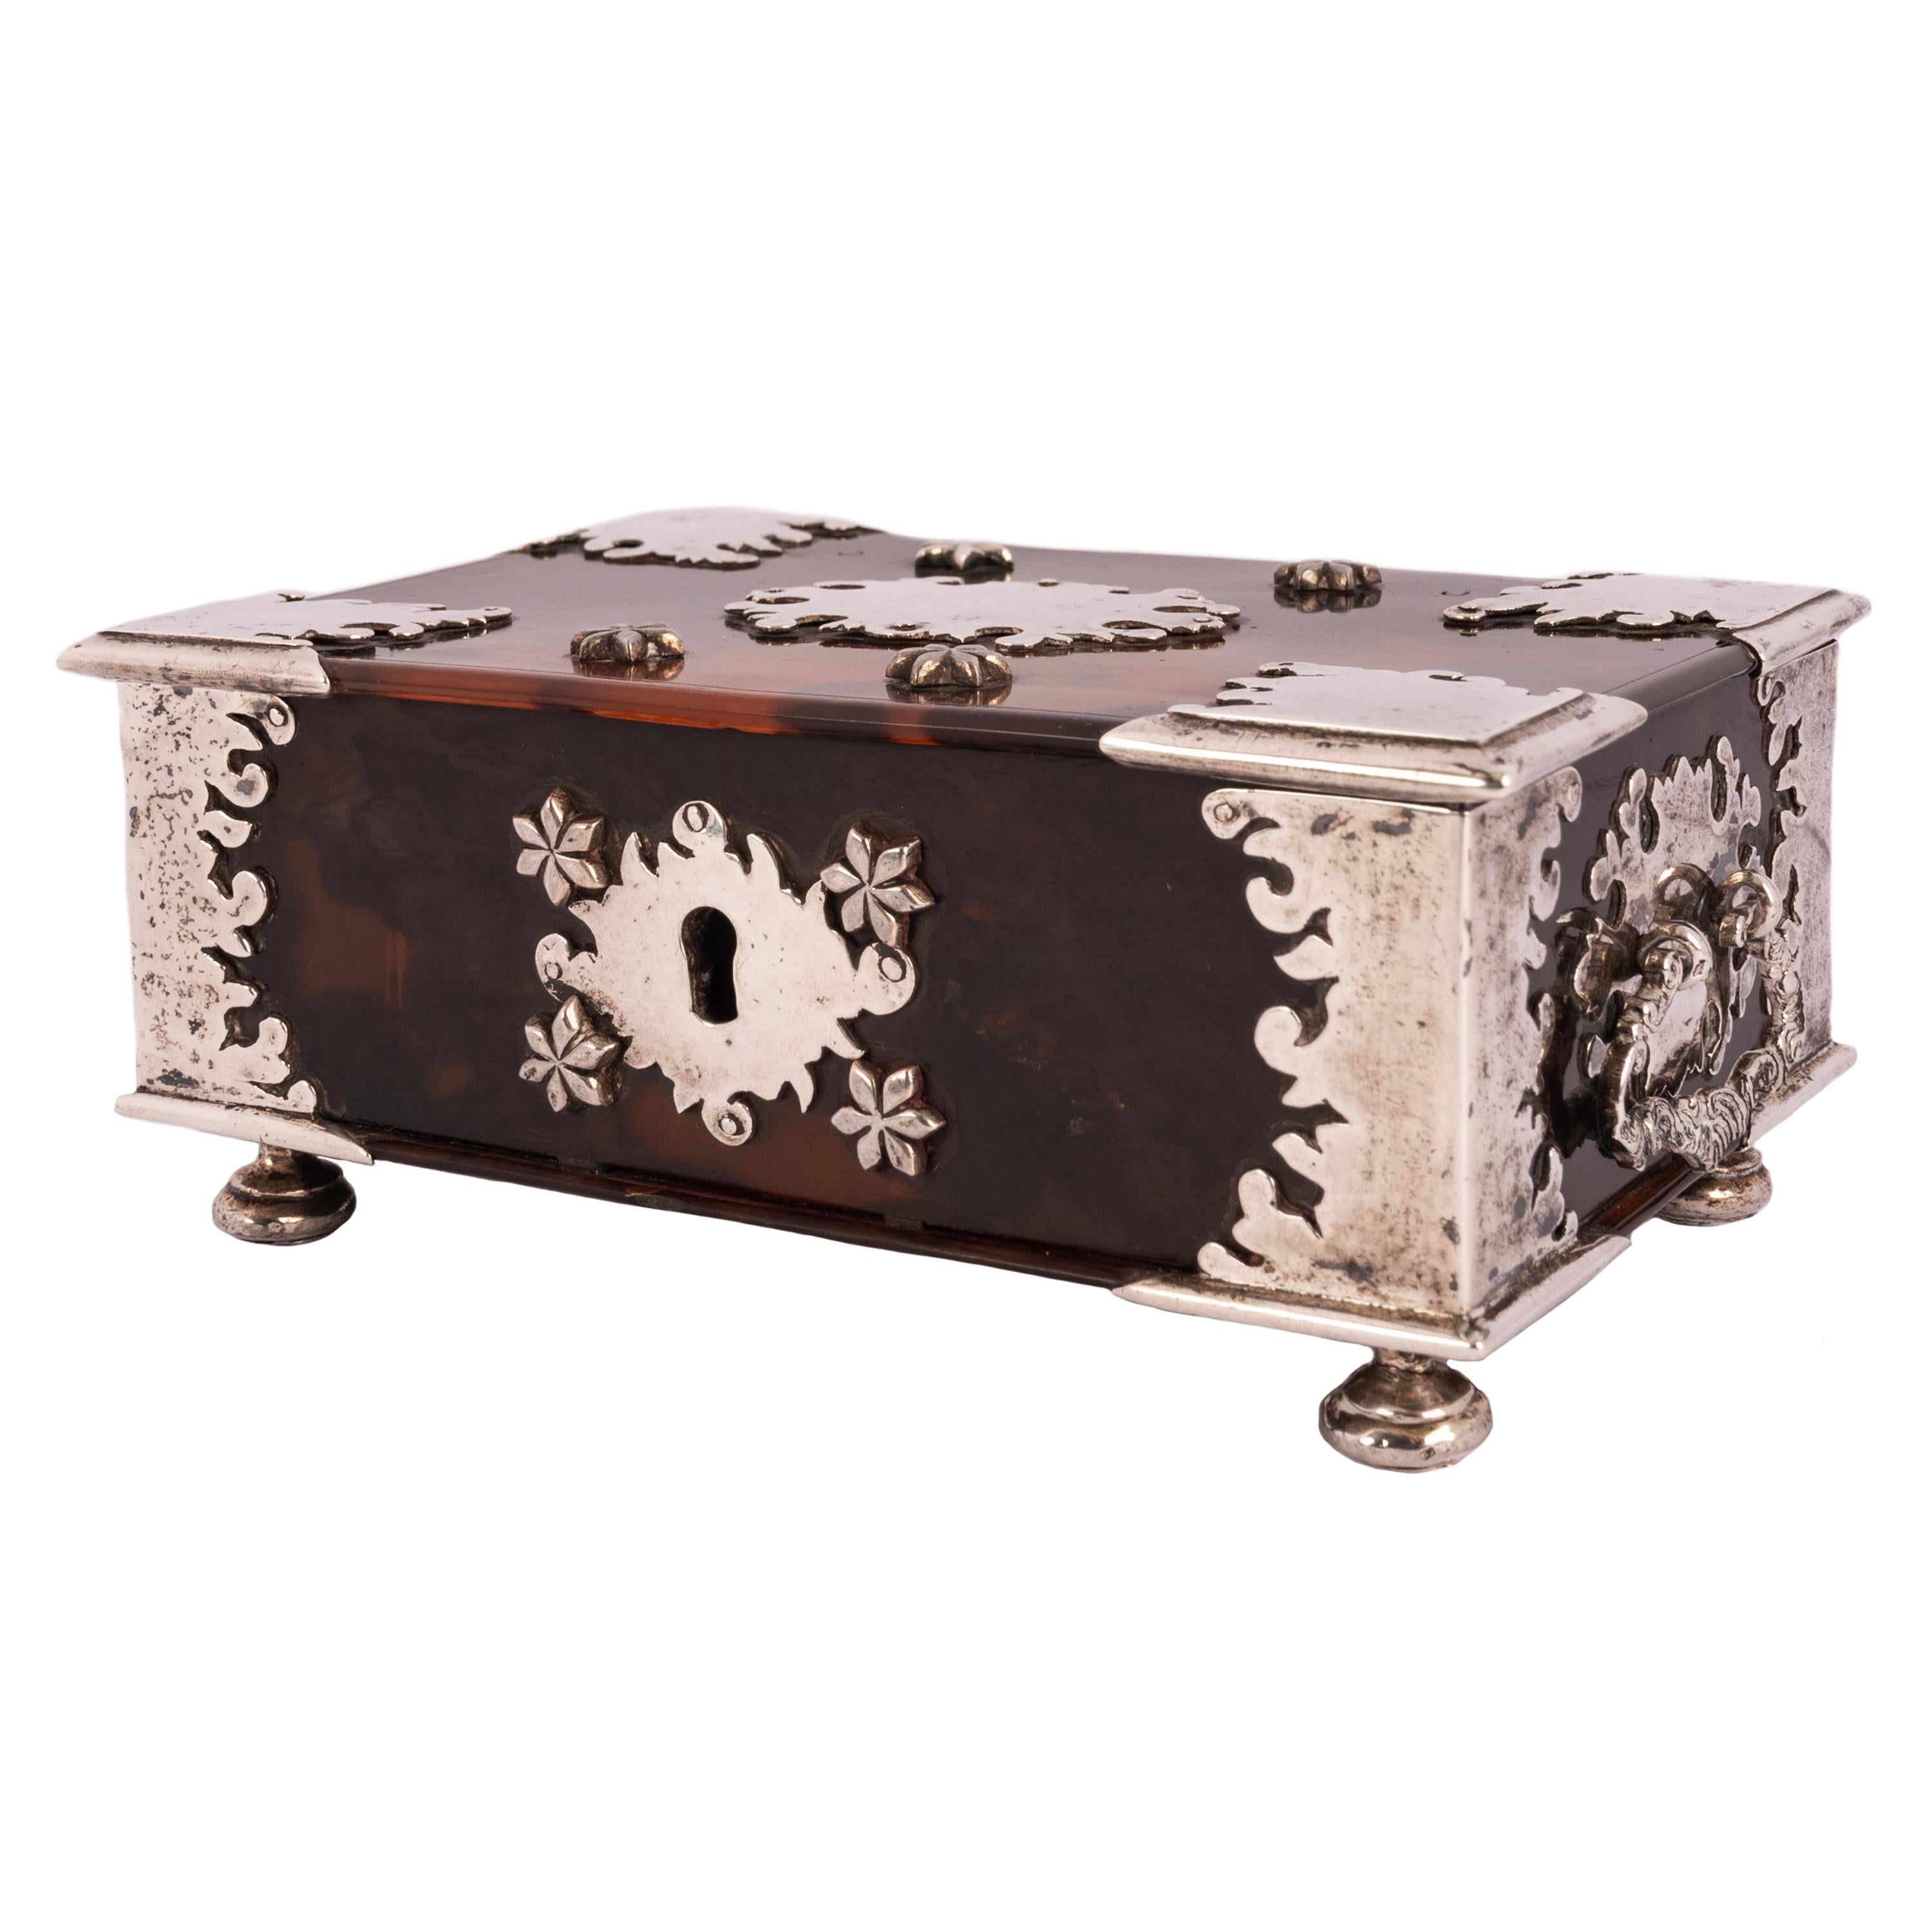 A rare, Dutch Colonial, Batavian (now Jakarta) Dutch East Indies silver and tortoise shell Sirih casket, circa 1750.
The casket was used for storing highly prized betel nut, which was chewed ritually by high ranking Indonesian officials and adopted